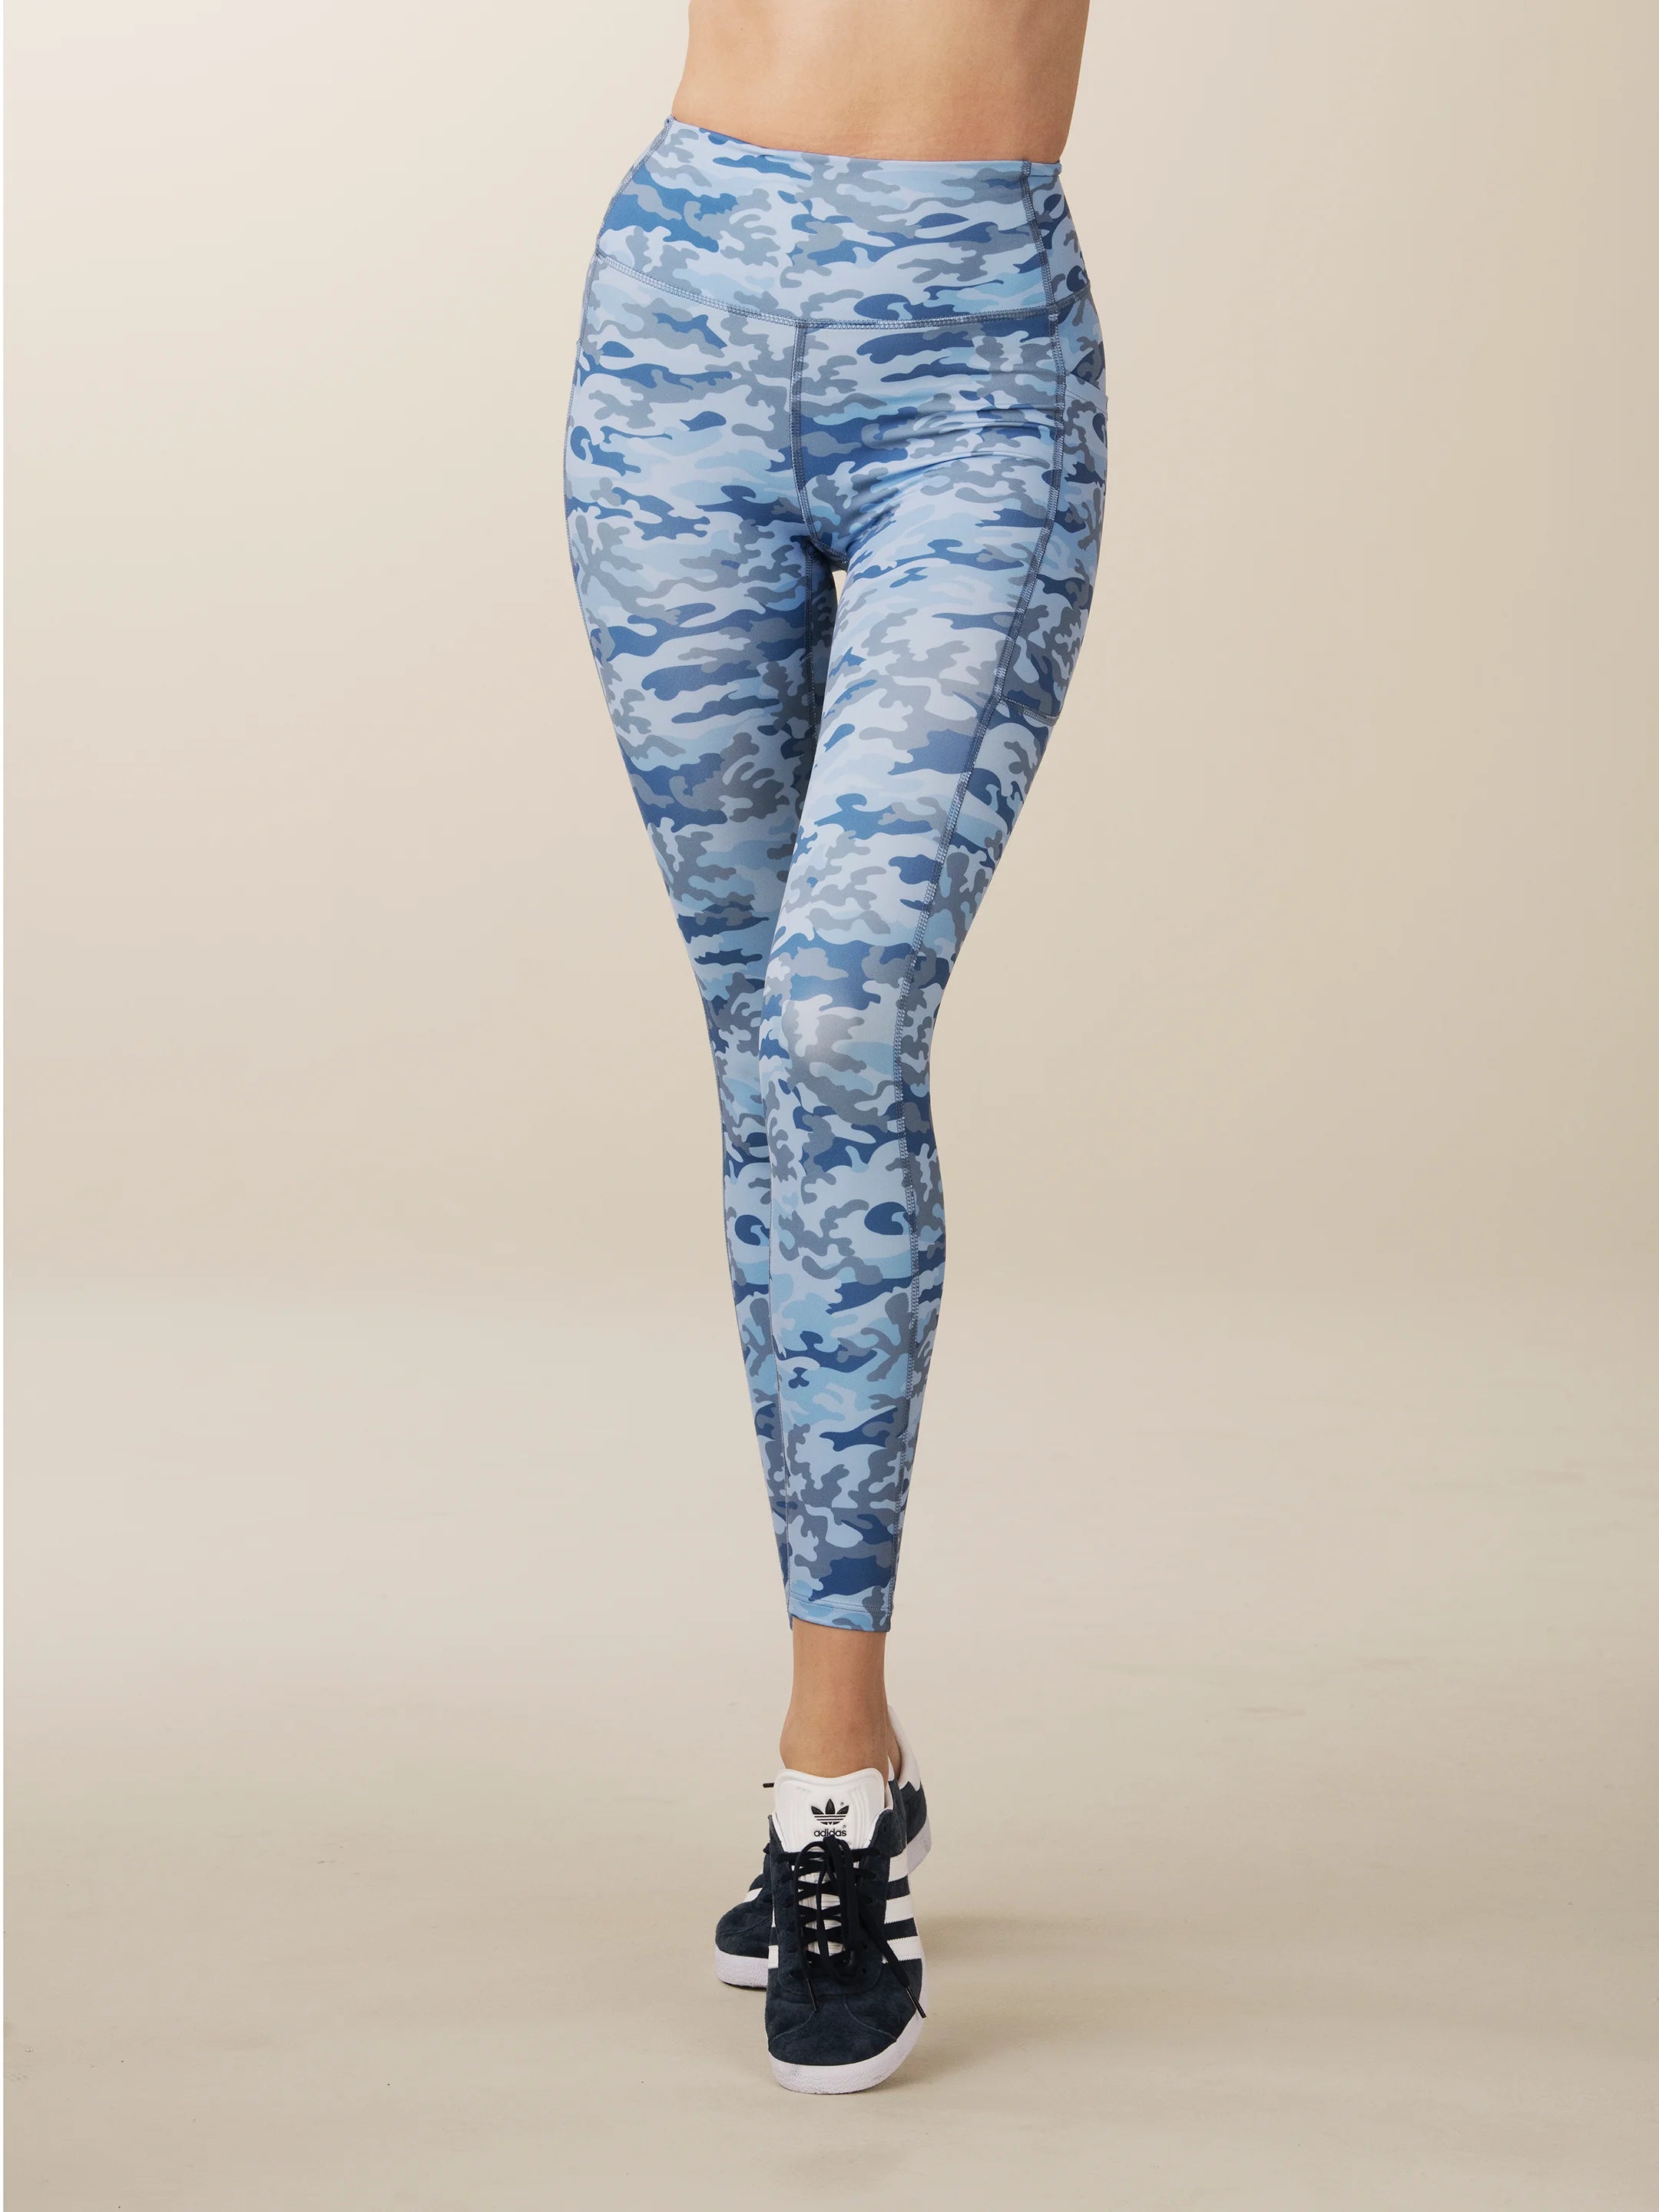 Balance Athletica Midnight Snow Leopard leggings Multiple Size XS - $40  (50% Off Retail) - From kaitlynn